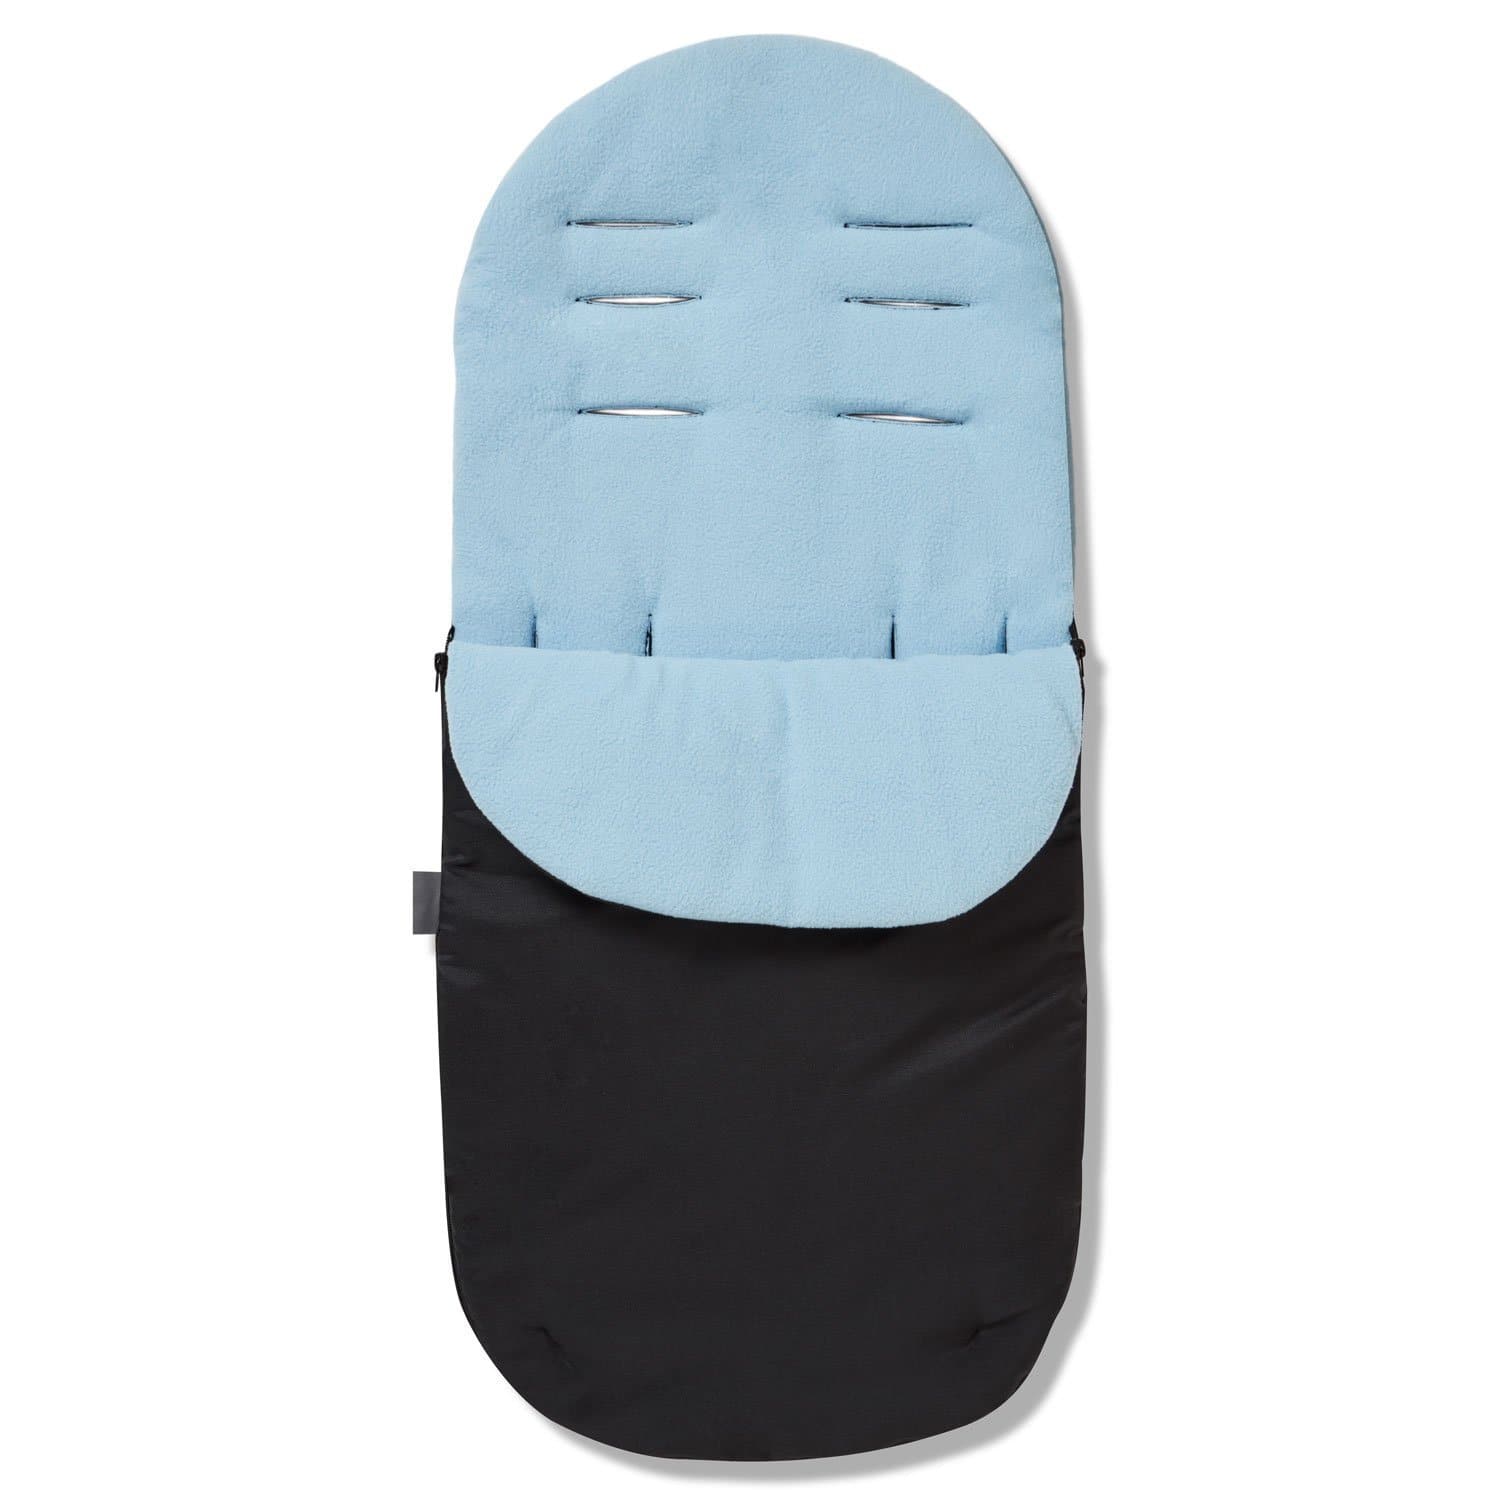 Footmuff / Cosy Toes Compatible with Baby Trend - Light Blue / Fits All Models | For Your Little One